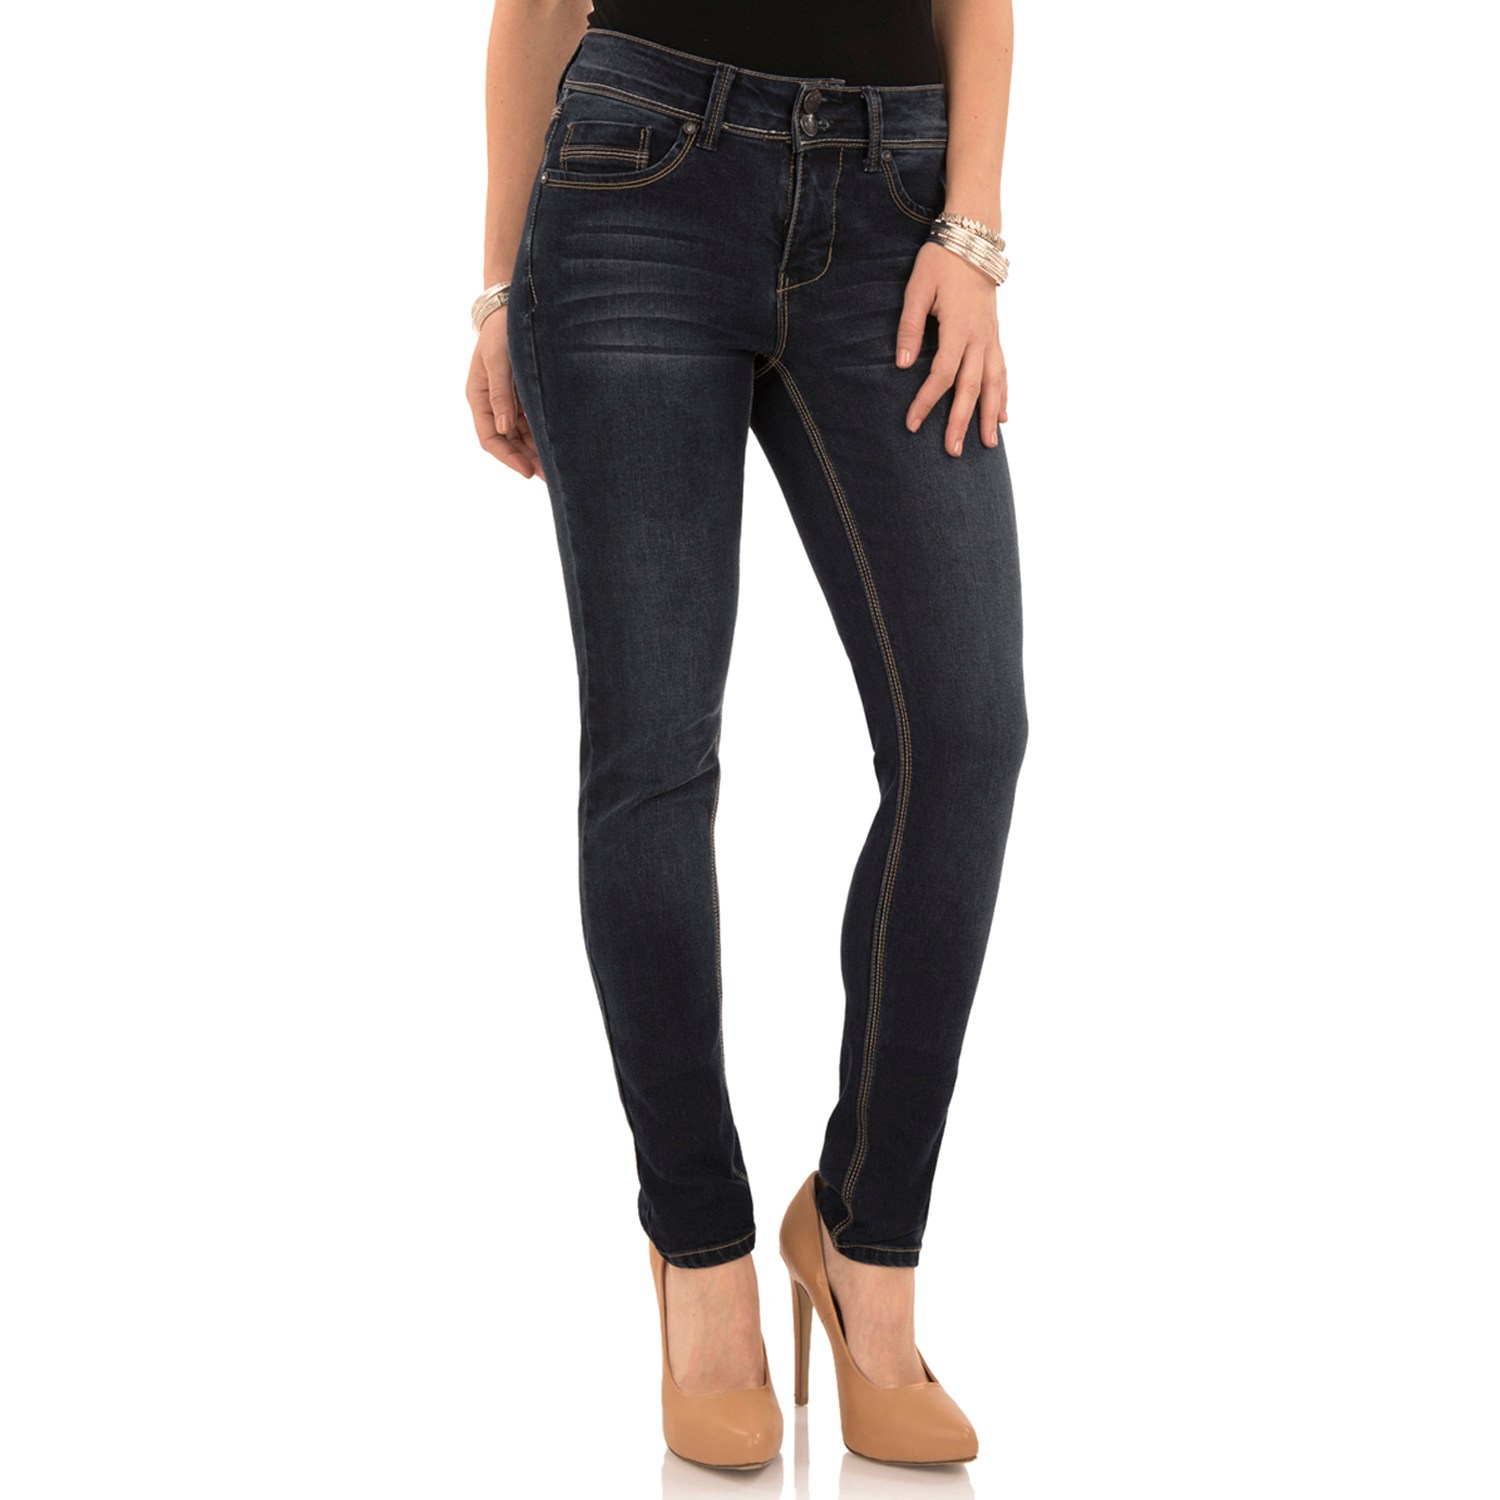 Angels – WOMEN’S JEANS WITH A PERFECT FIT